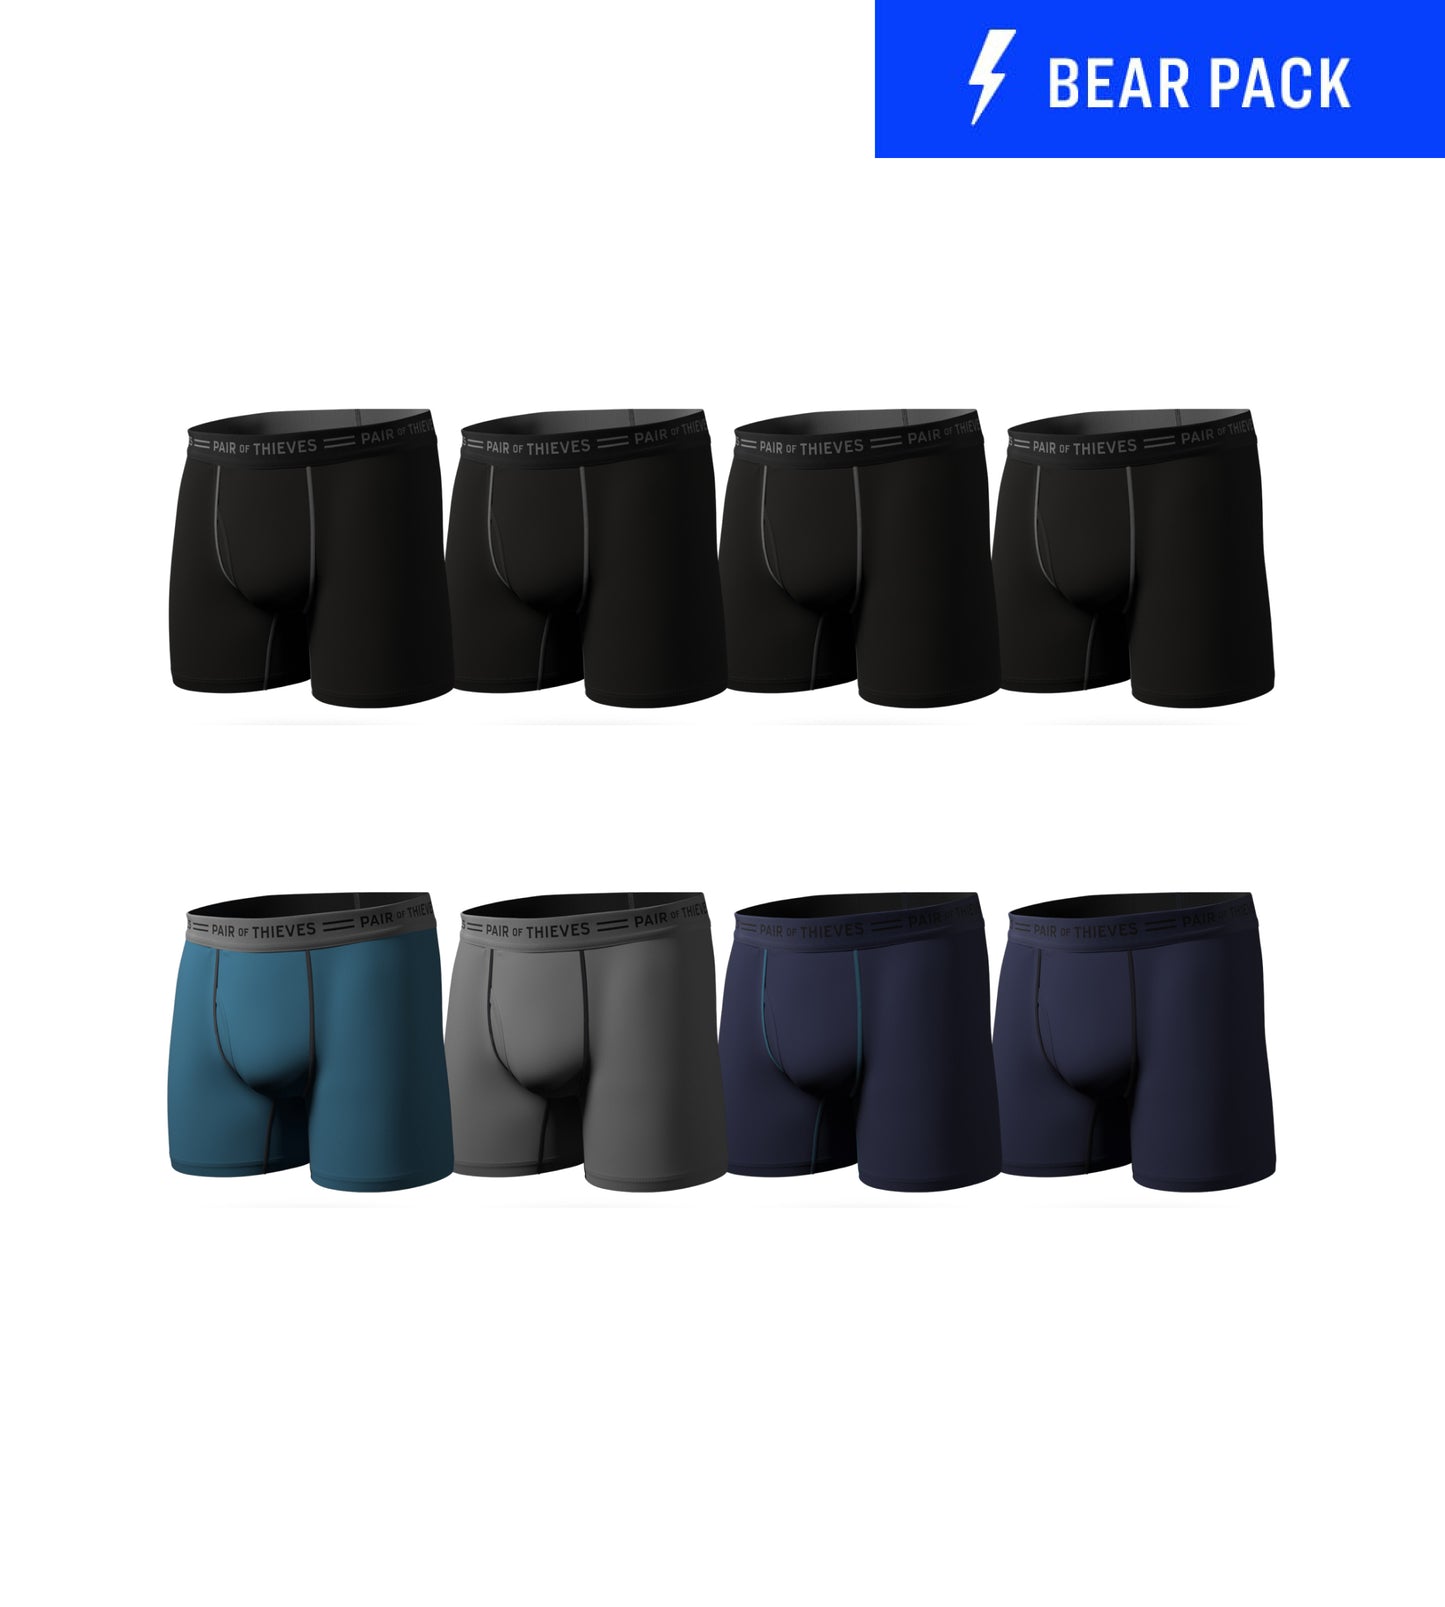 Every Day Kit Boxer Brief Bear Pack (8-pack) containing the colors Black, Blue, Dim gray, Black, Dark slate gray, Light steel blue, Dark slate gray, Dim gray, Dark slate gray